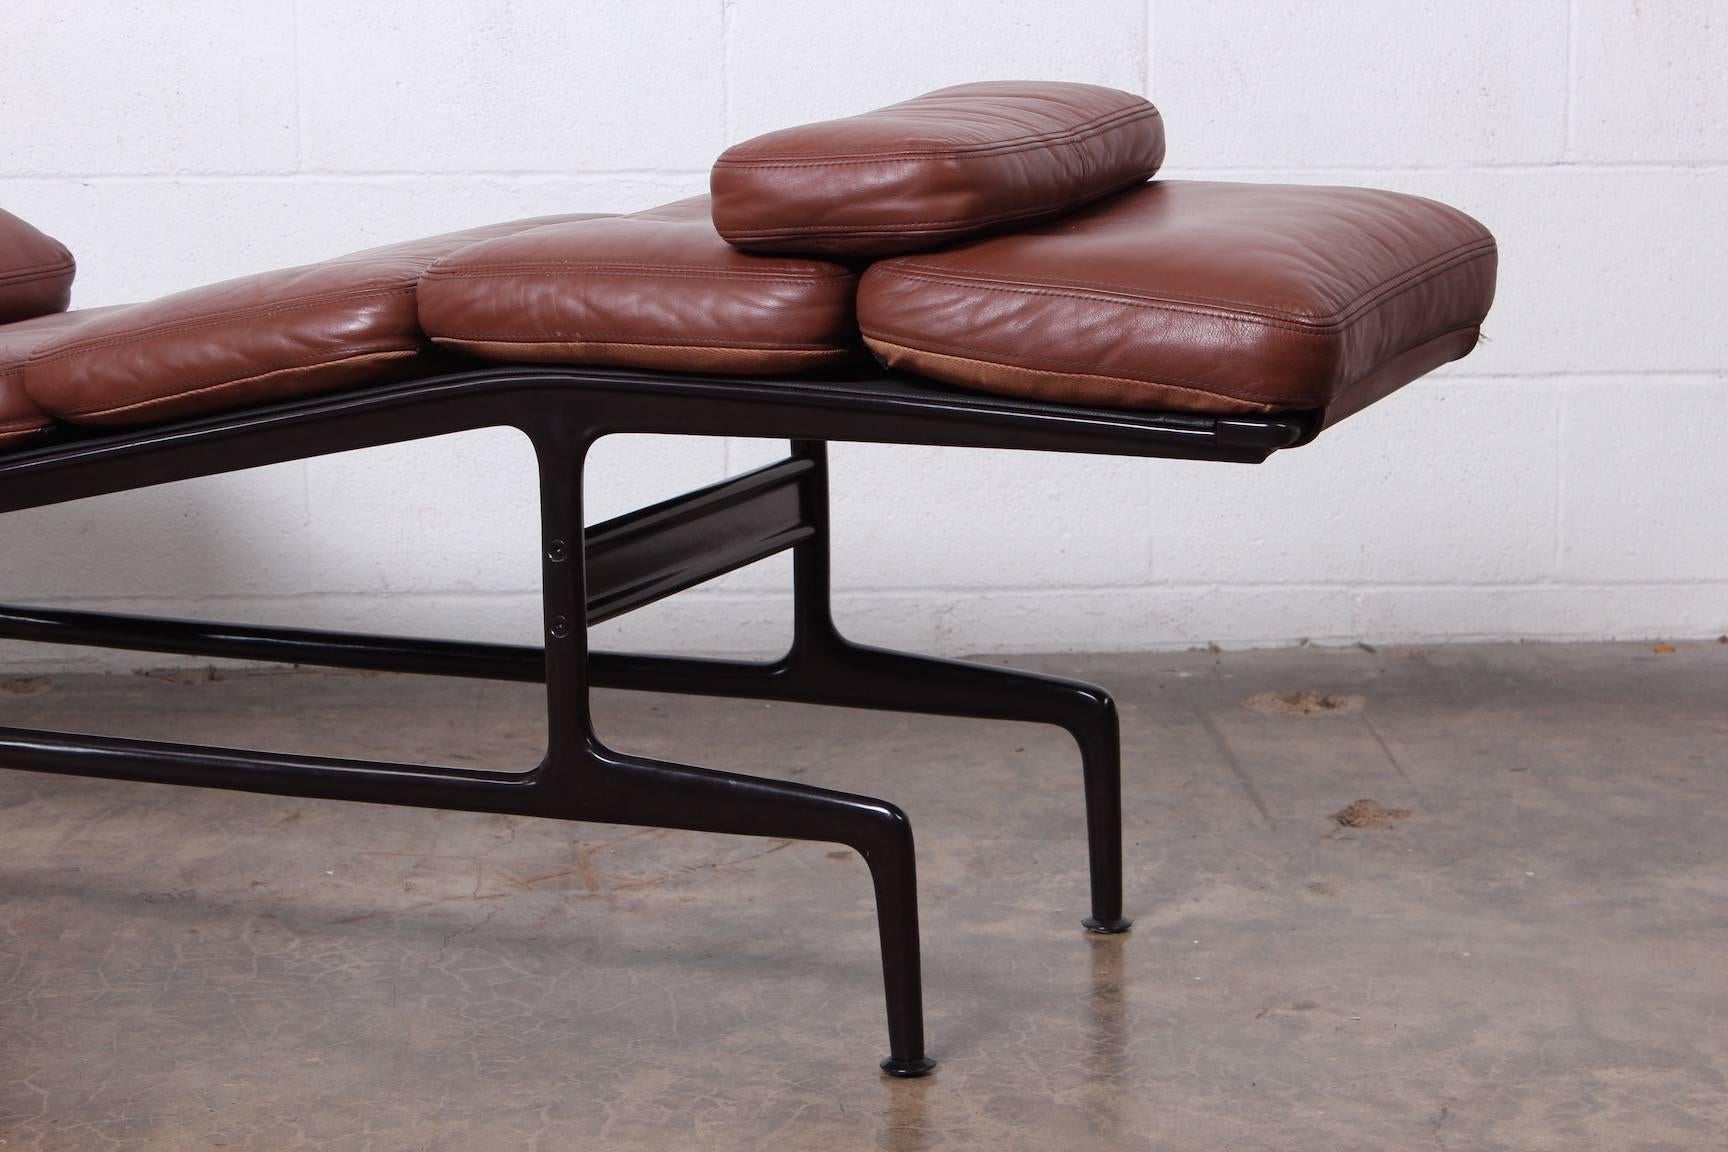 A Billy Wilder chaise in brown leather with eggplant colored frame. Designed by Charles Eames for Herman Miller.
     